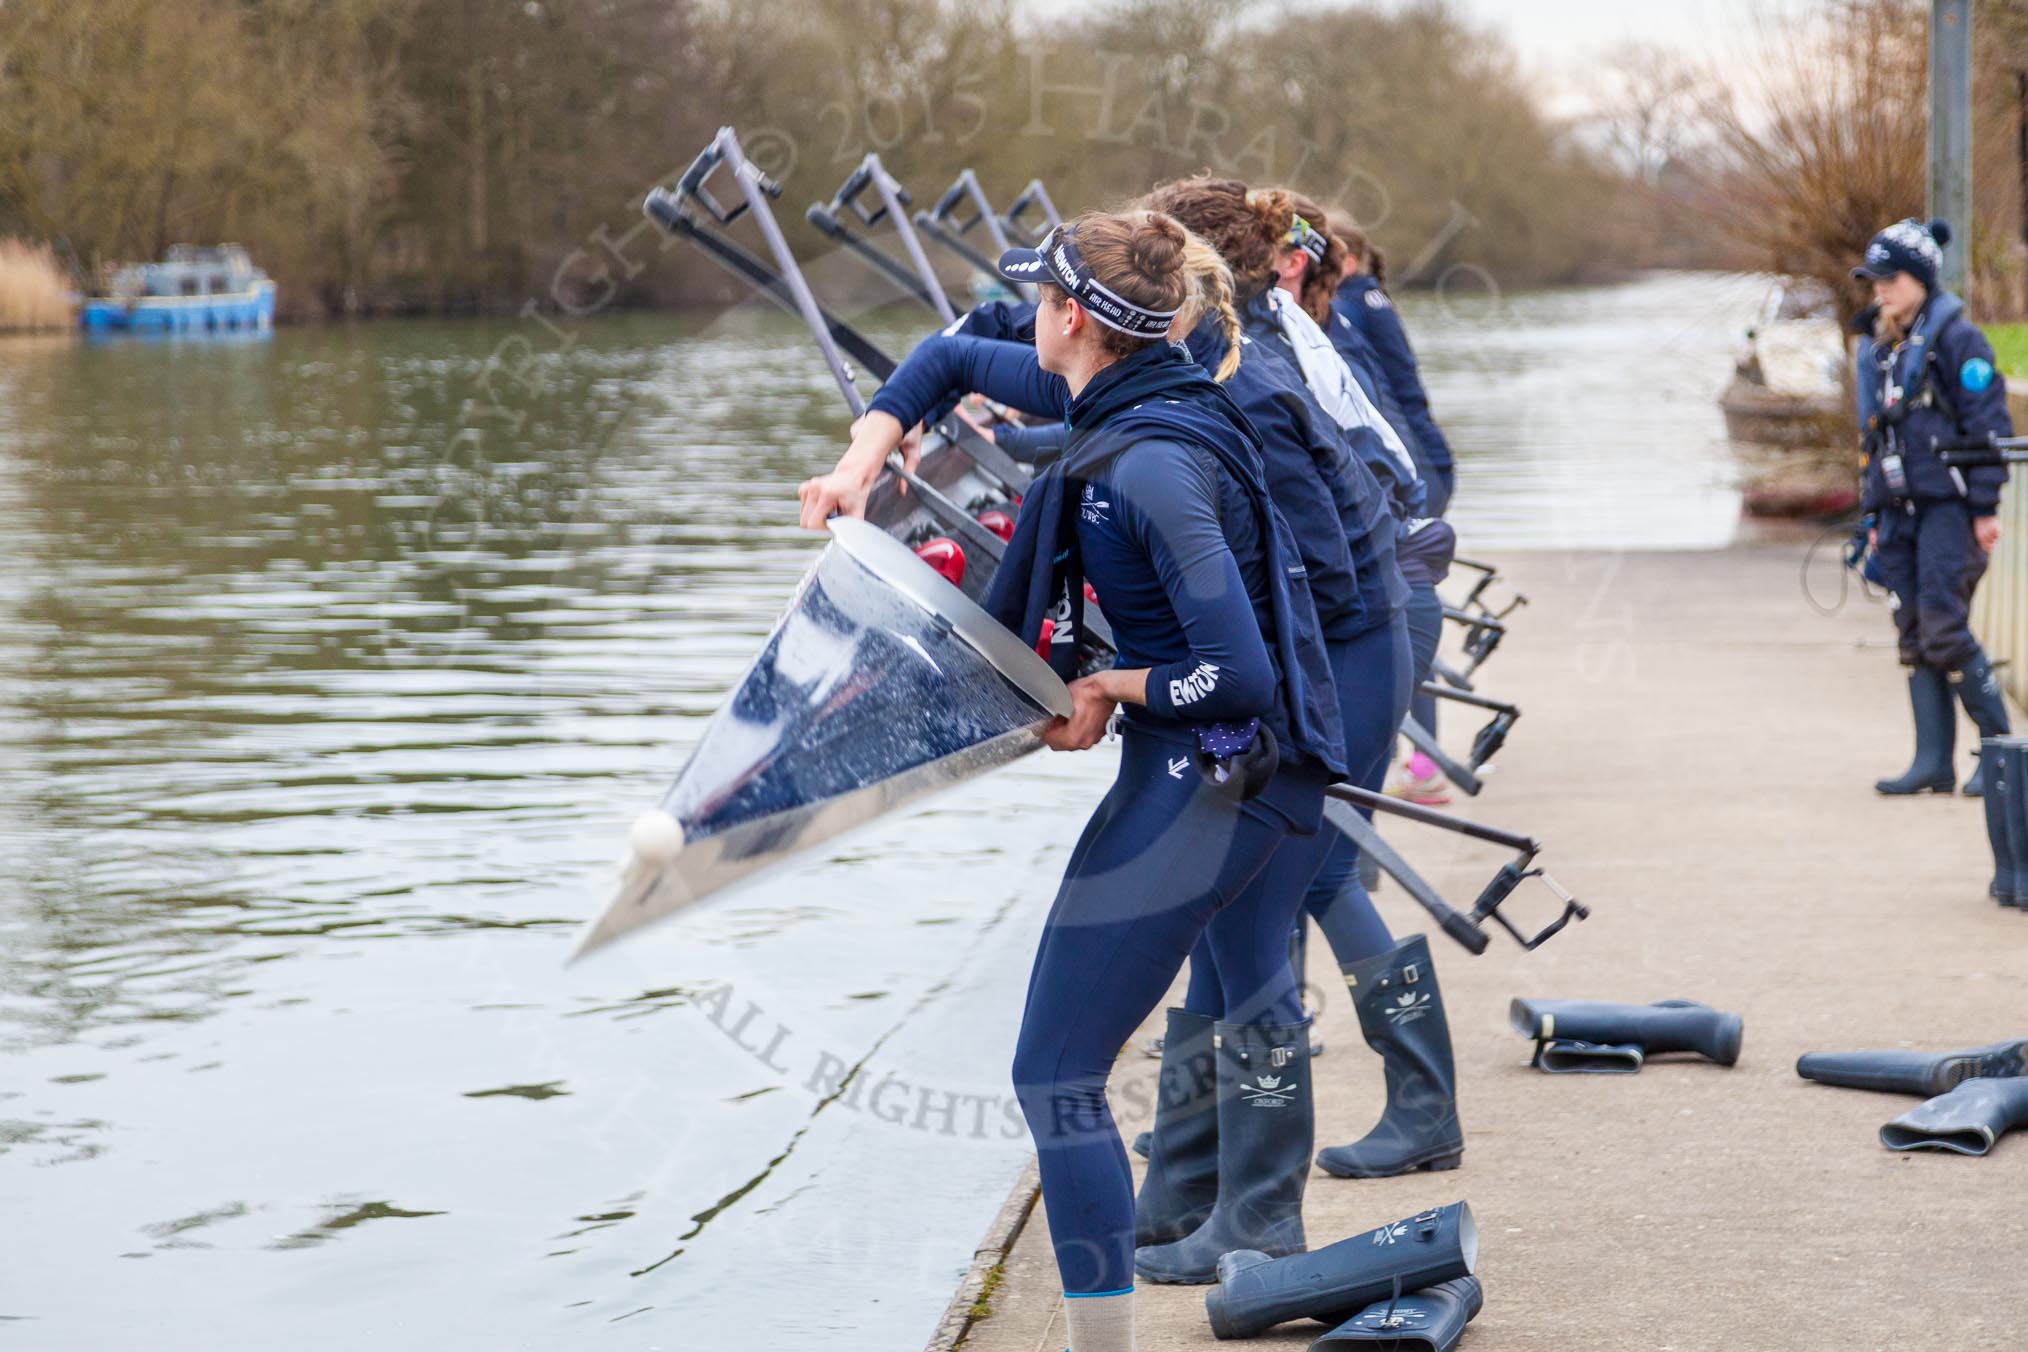 The Boat Race season 2016 - OUWBC training Wallingford: The end of the training session for the OUWBC Blue Boat crew, on the day before the Boat Race Crew Announcement and Weigh-In.
River Thames,
Wallingford,
Oxfordshire,

on 29 February 2016 at 16:37, image #149